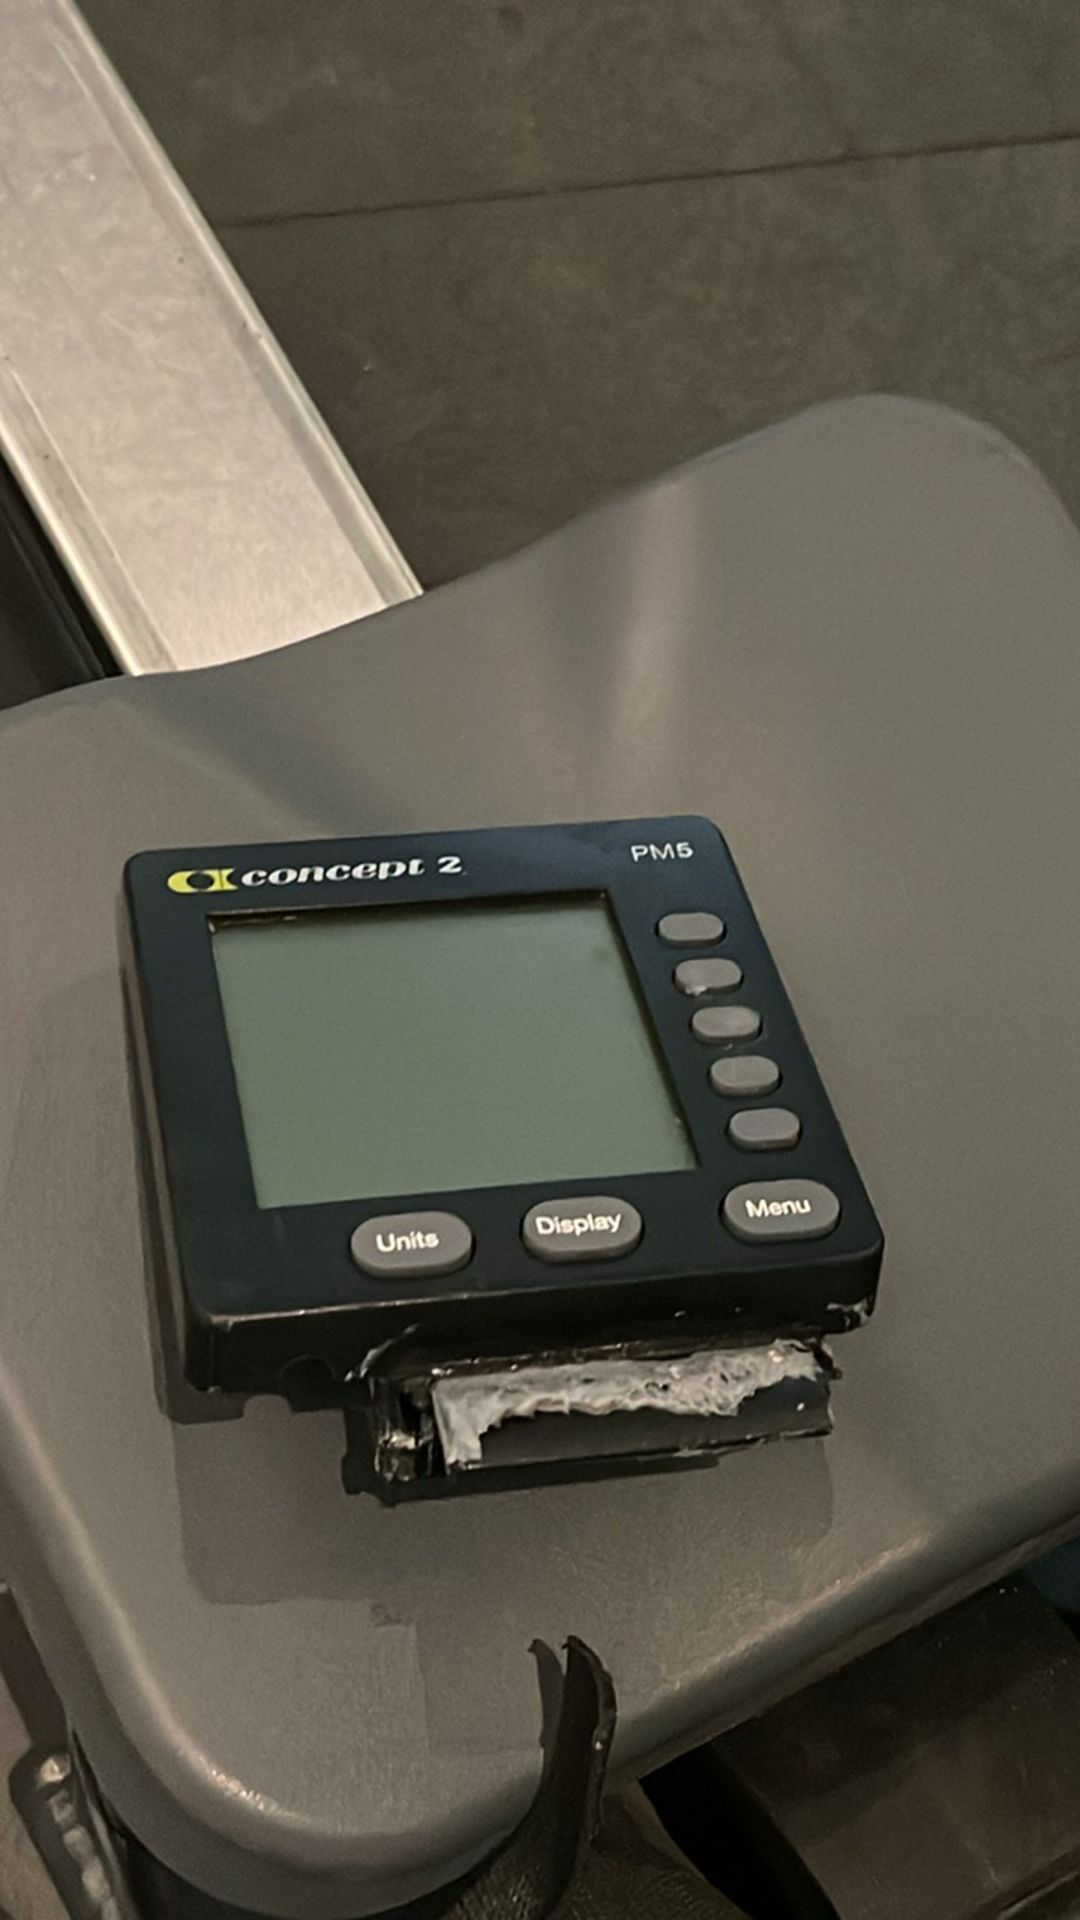 Concept 2 Rower - Image 8 of 8